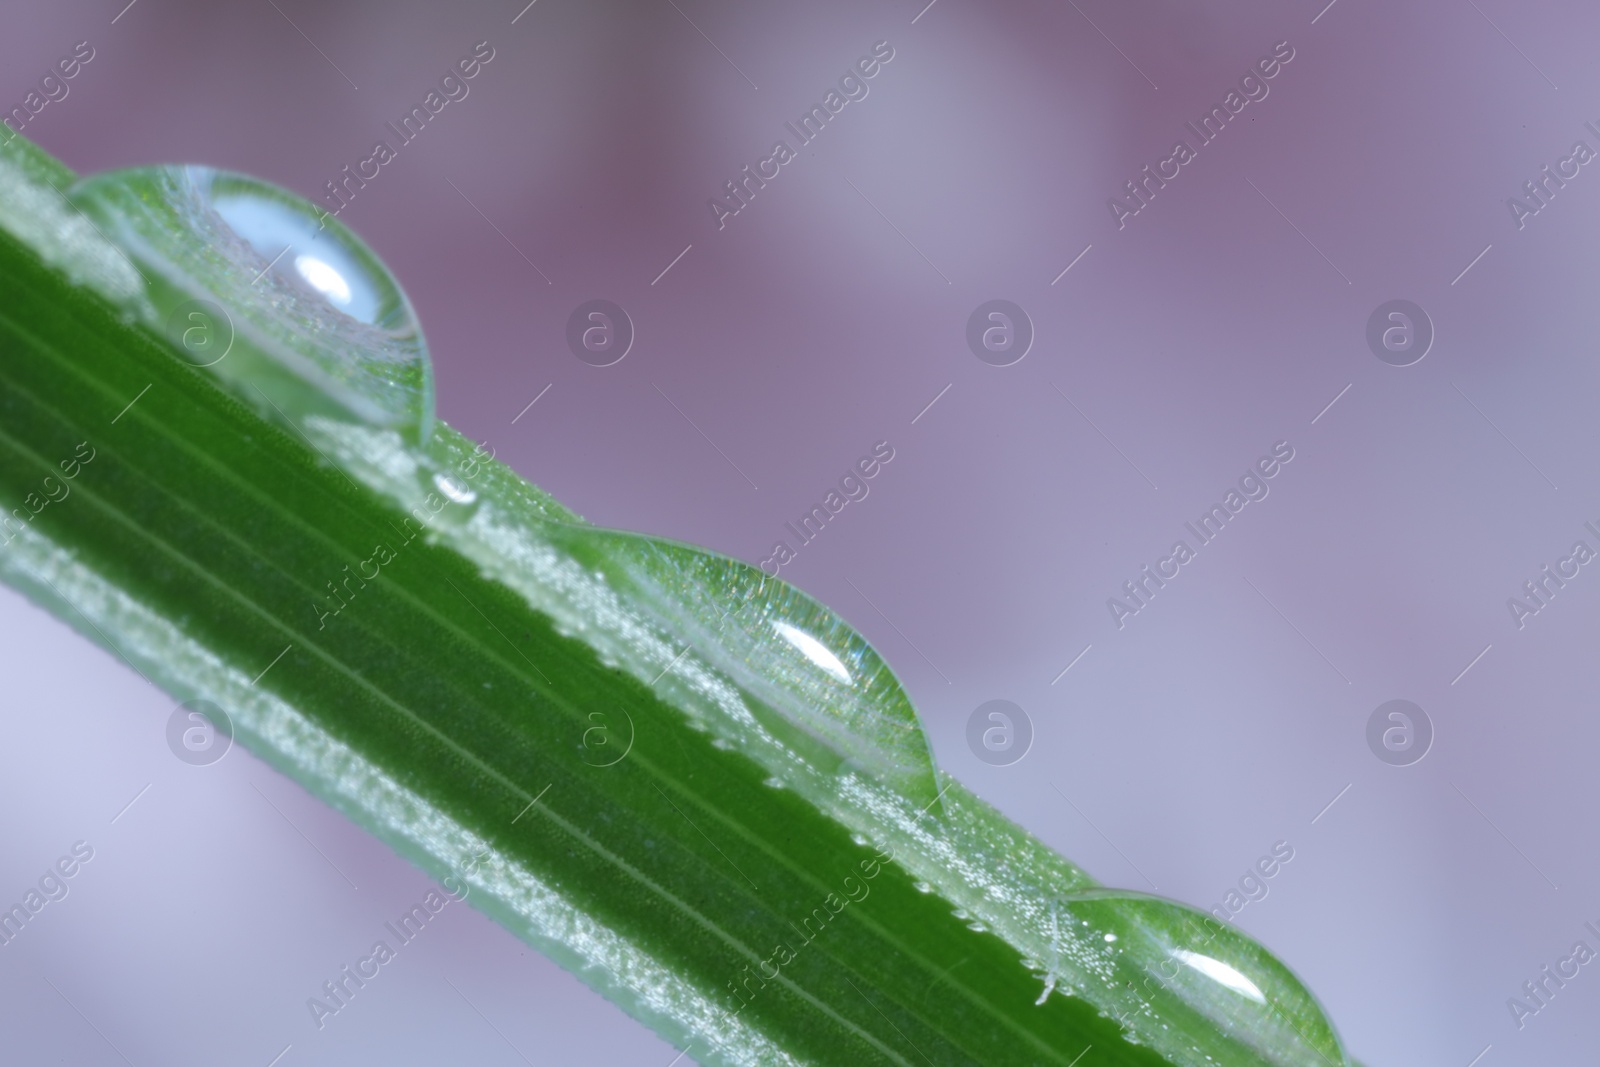 Photo of Green leaf with water drops against blurred background, macro view